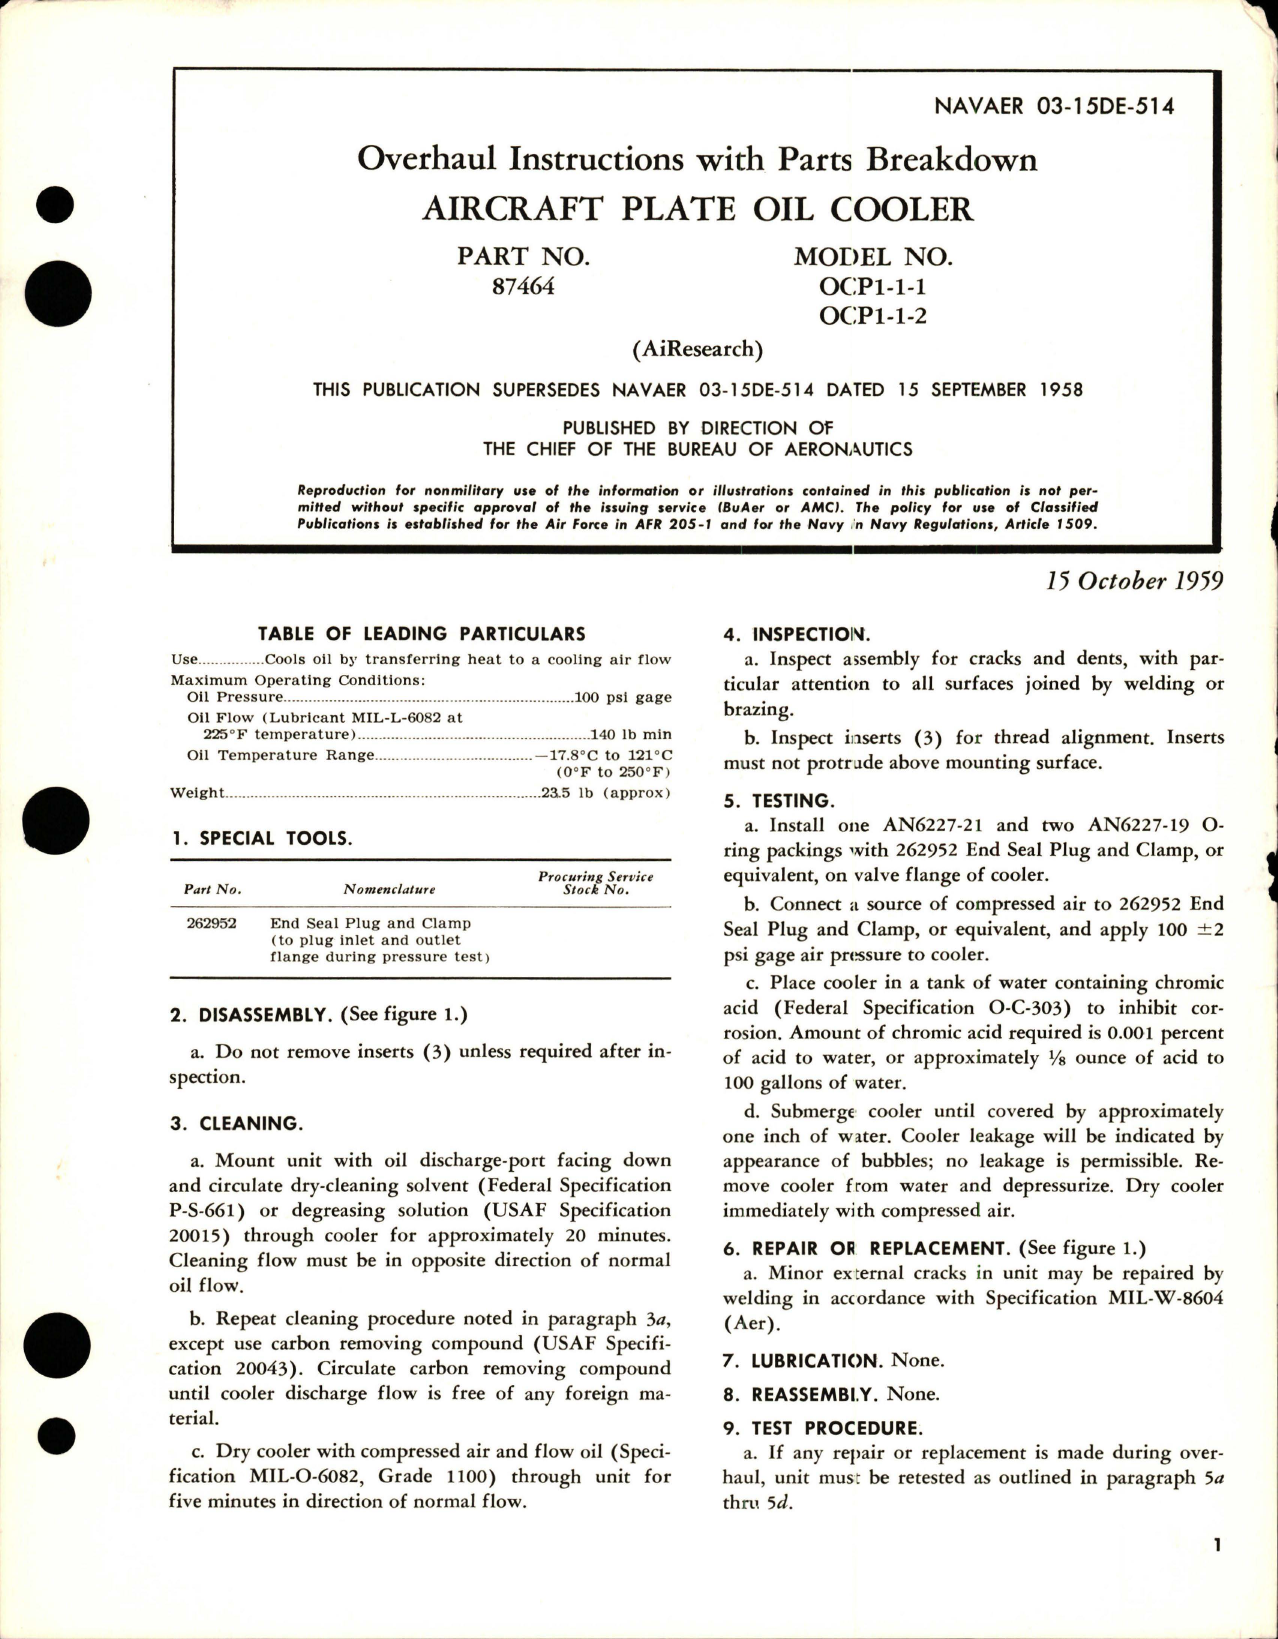 Sample page 1 from AirCorps Library document: Overhaul Instructions with Parts Breakdown for Aircraft Plate Oil Cooler - Part 87464 - Model OCP1-1-1 and OCP1-1-2